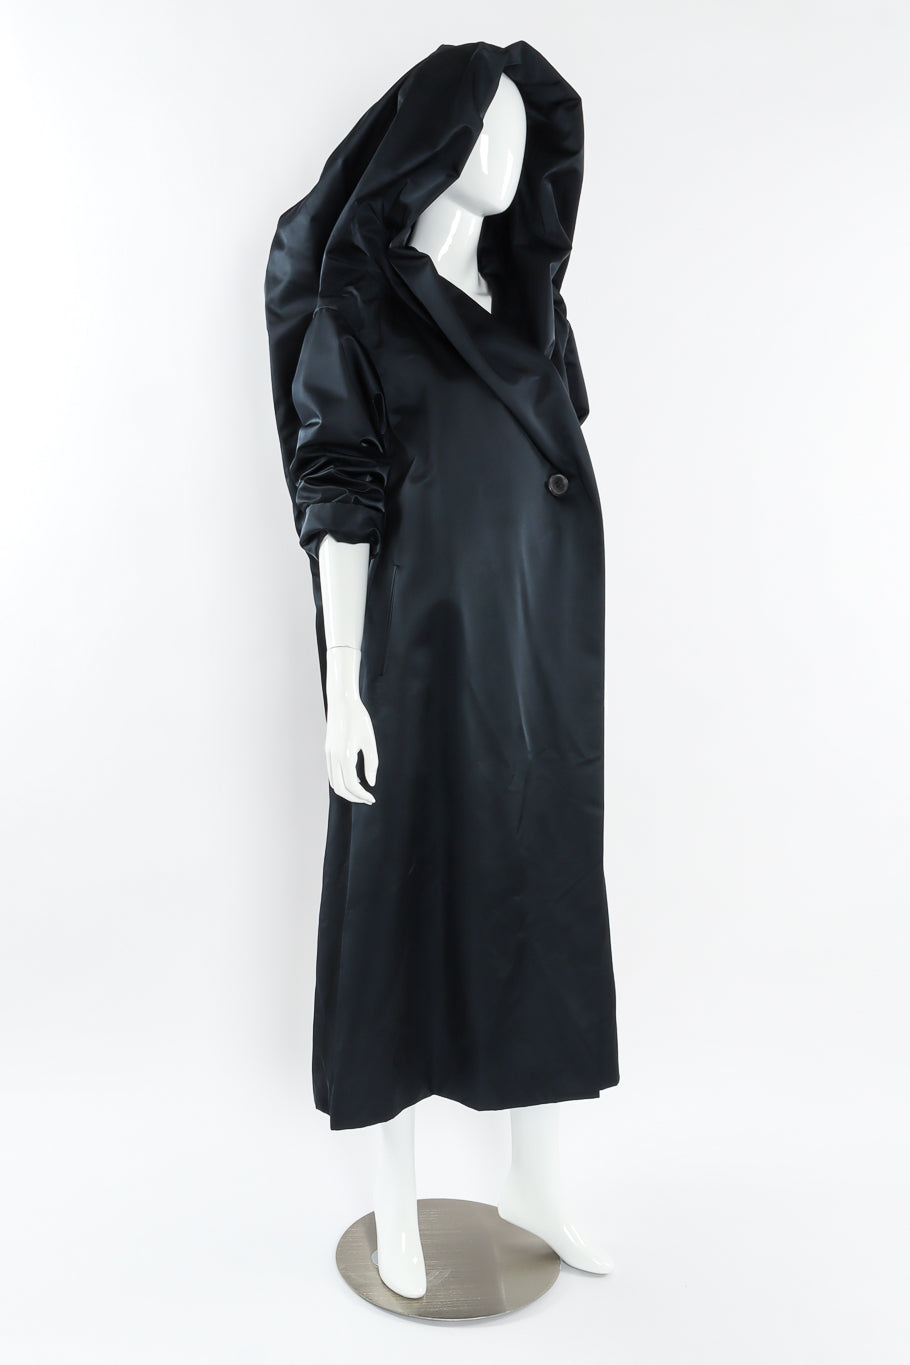 Vintage Issey Miyake Hooded Satin Overcoat mannequin front angle @ Recess LA